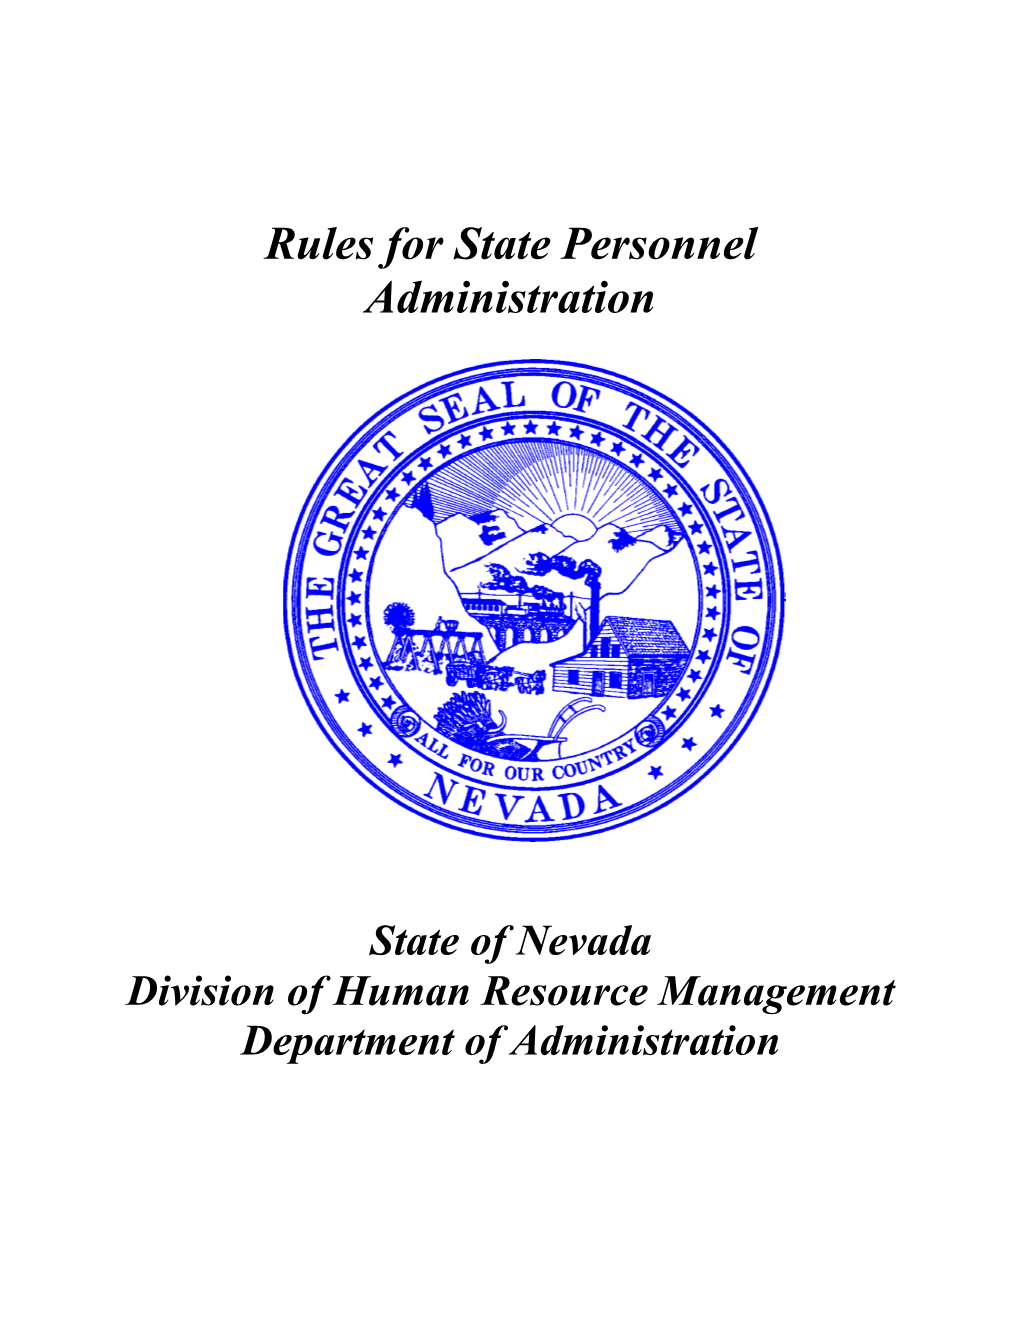 Rules for State Personnel Administration August 2020